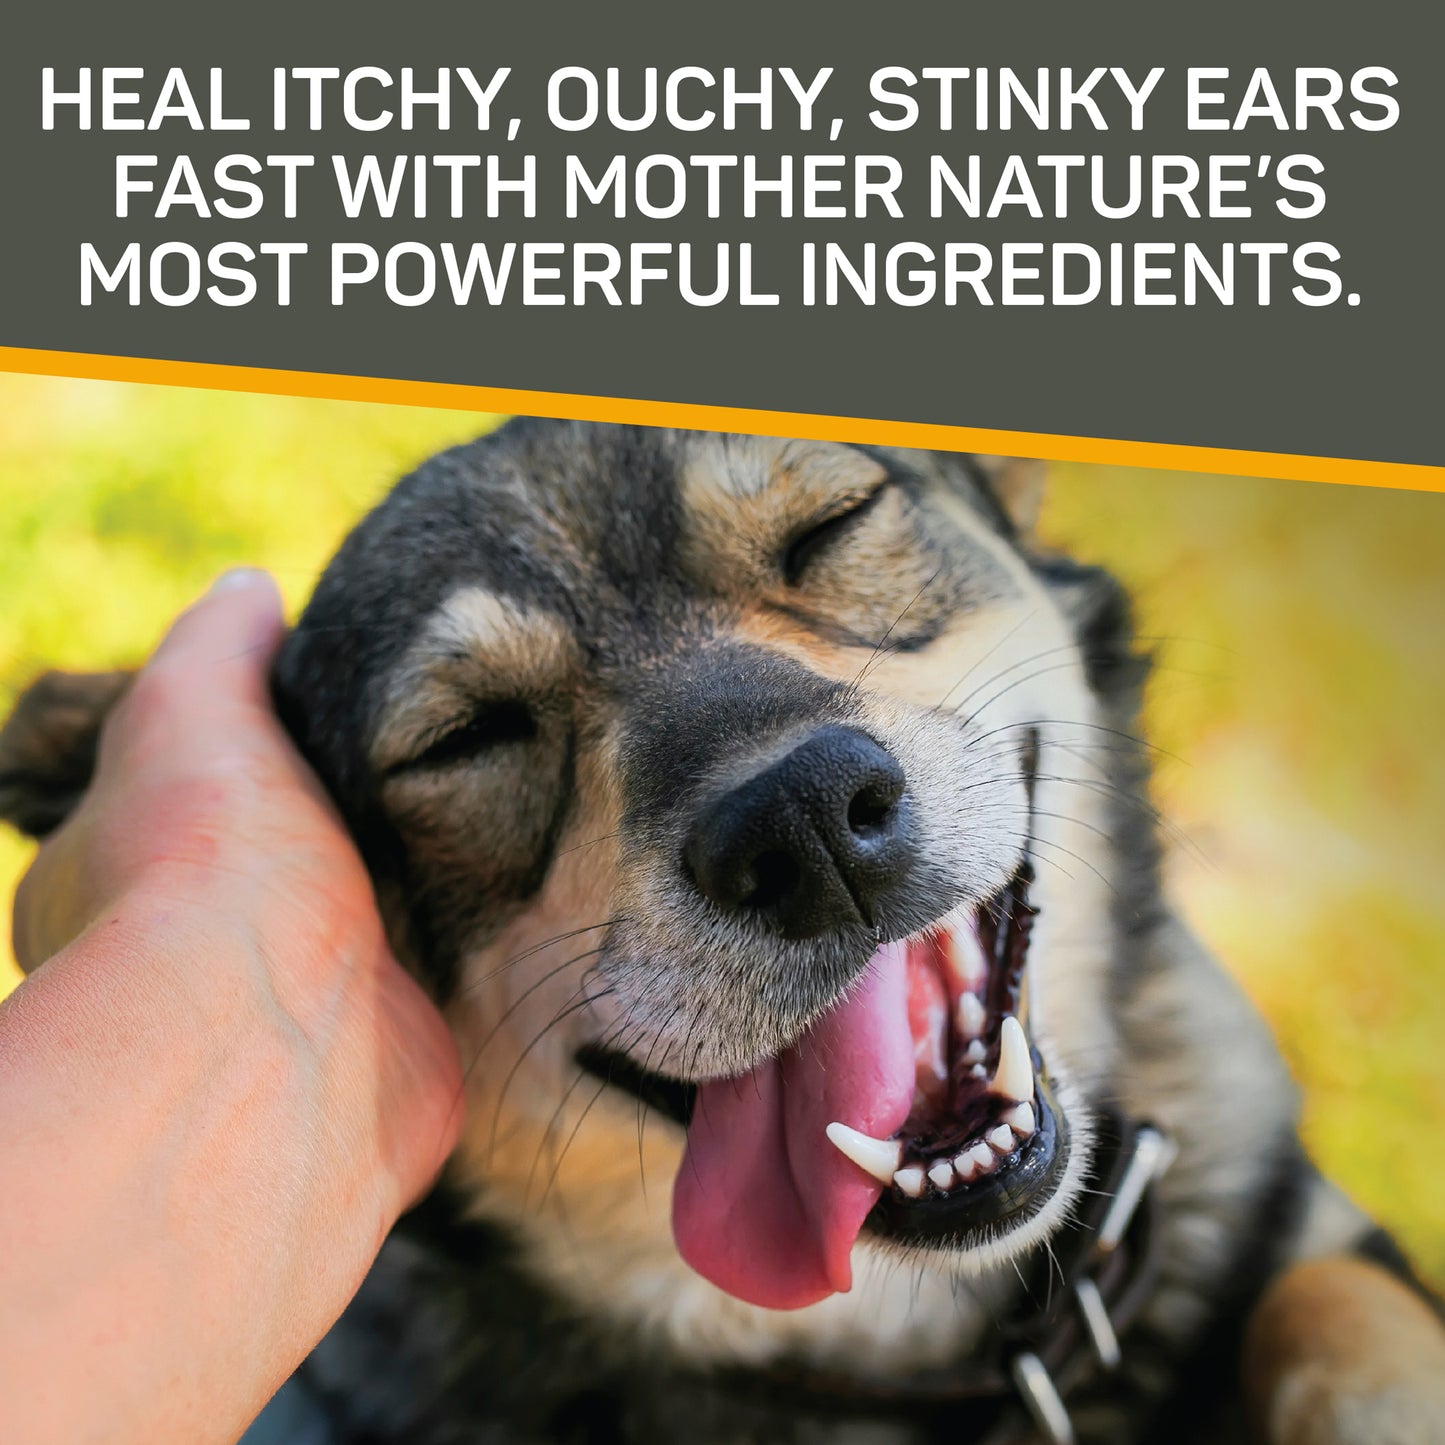 Dog loving getting his ear scratched by his owner, dog's eyes are closed and tongue hanging out.  Heal itchy, ouchy, stinky ears fast with mother nature's most powerful ingredients.